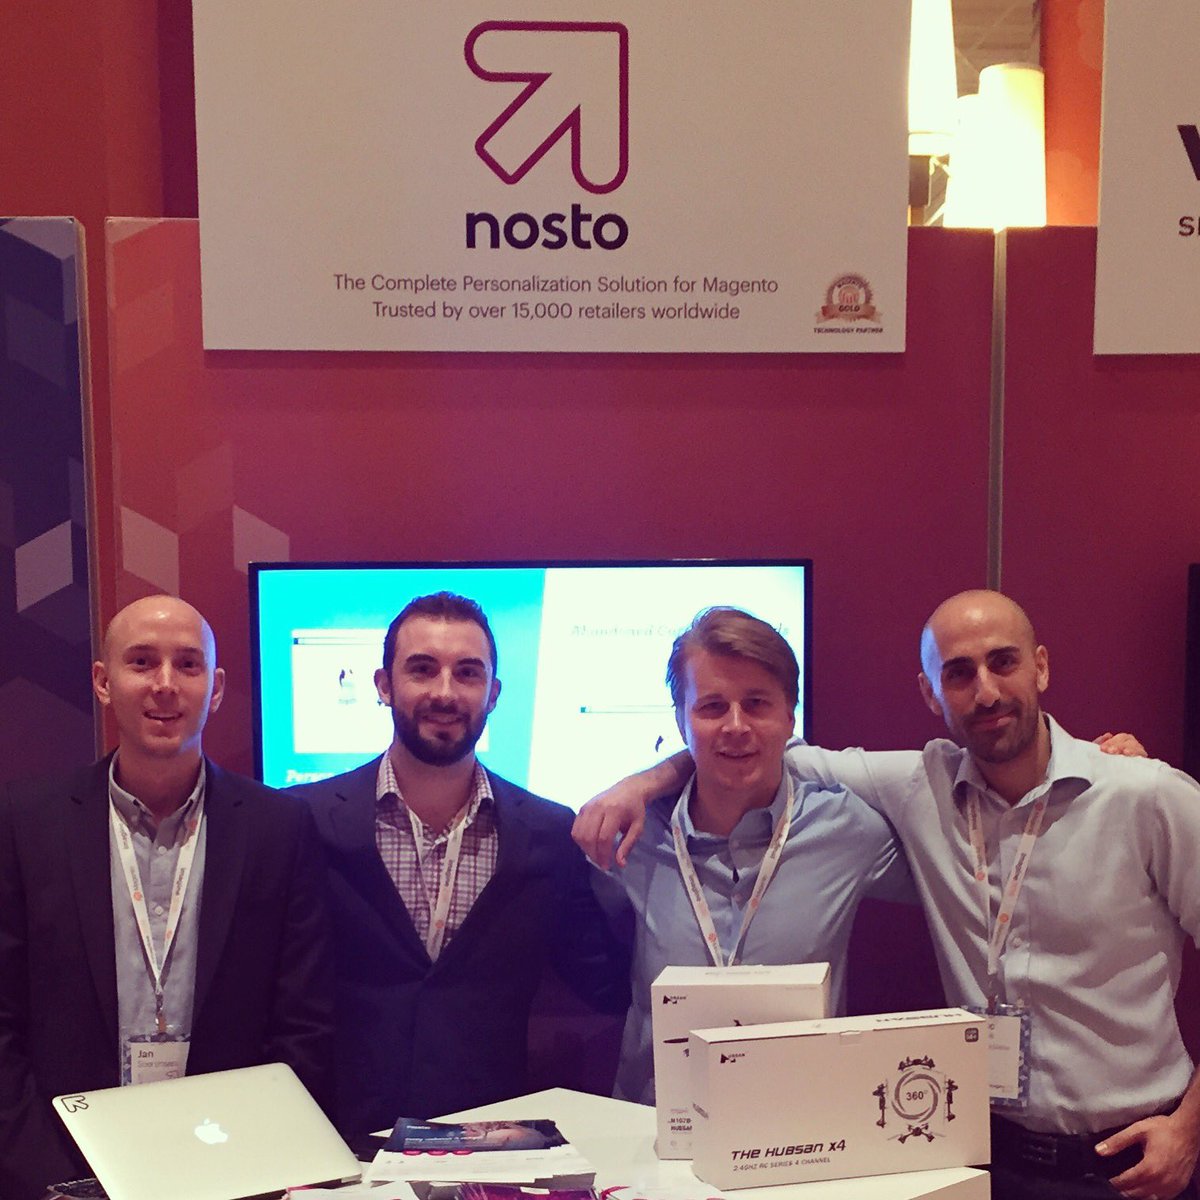 NostoSolutions: Swing by stand 5 & meet our team to learn how personalization can transform the CX on your store! #MagentoImagine https://t.co/osOqJ4uuFe